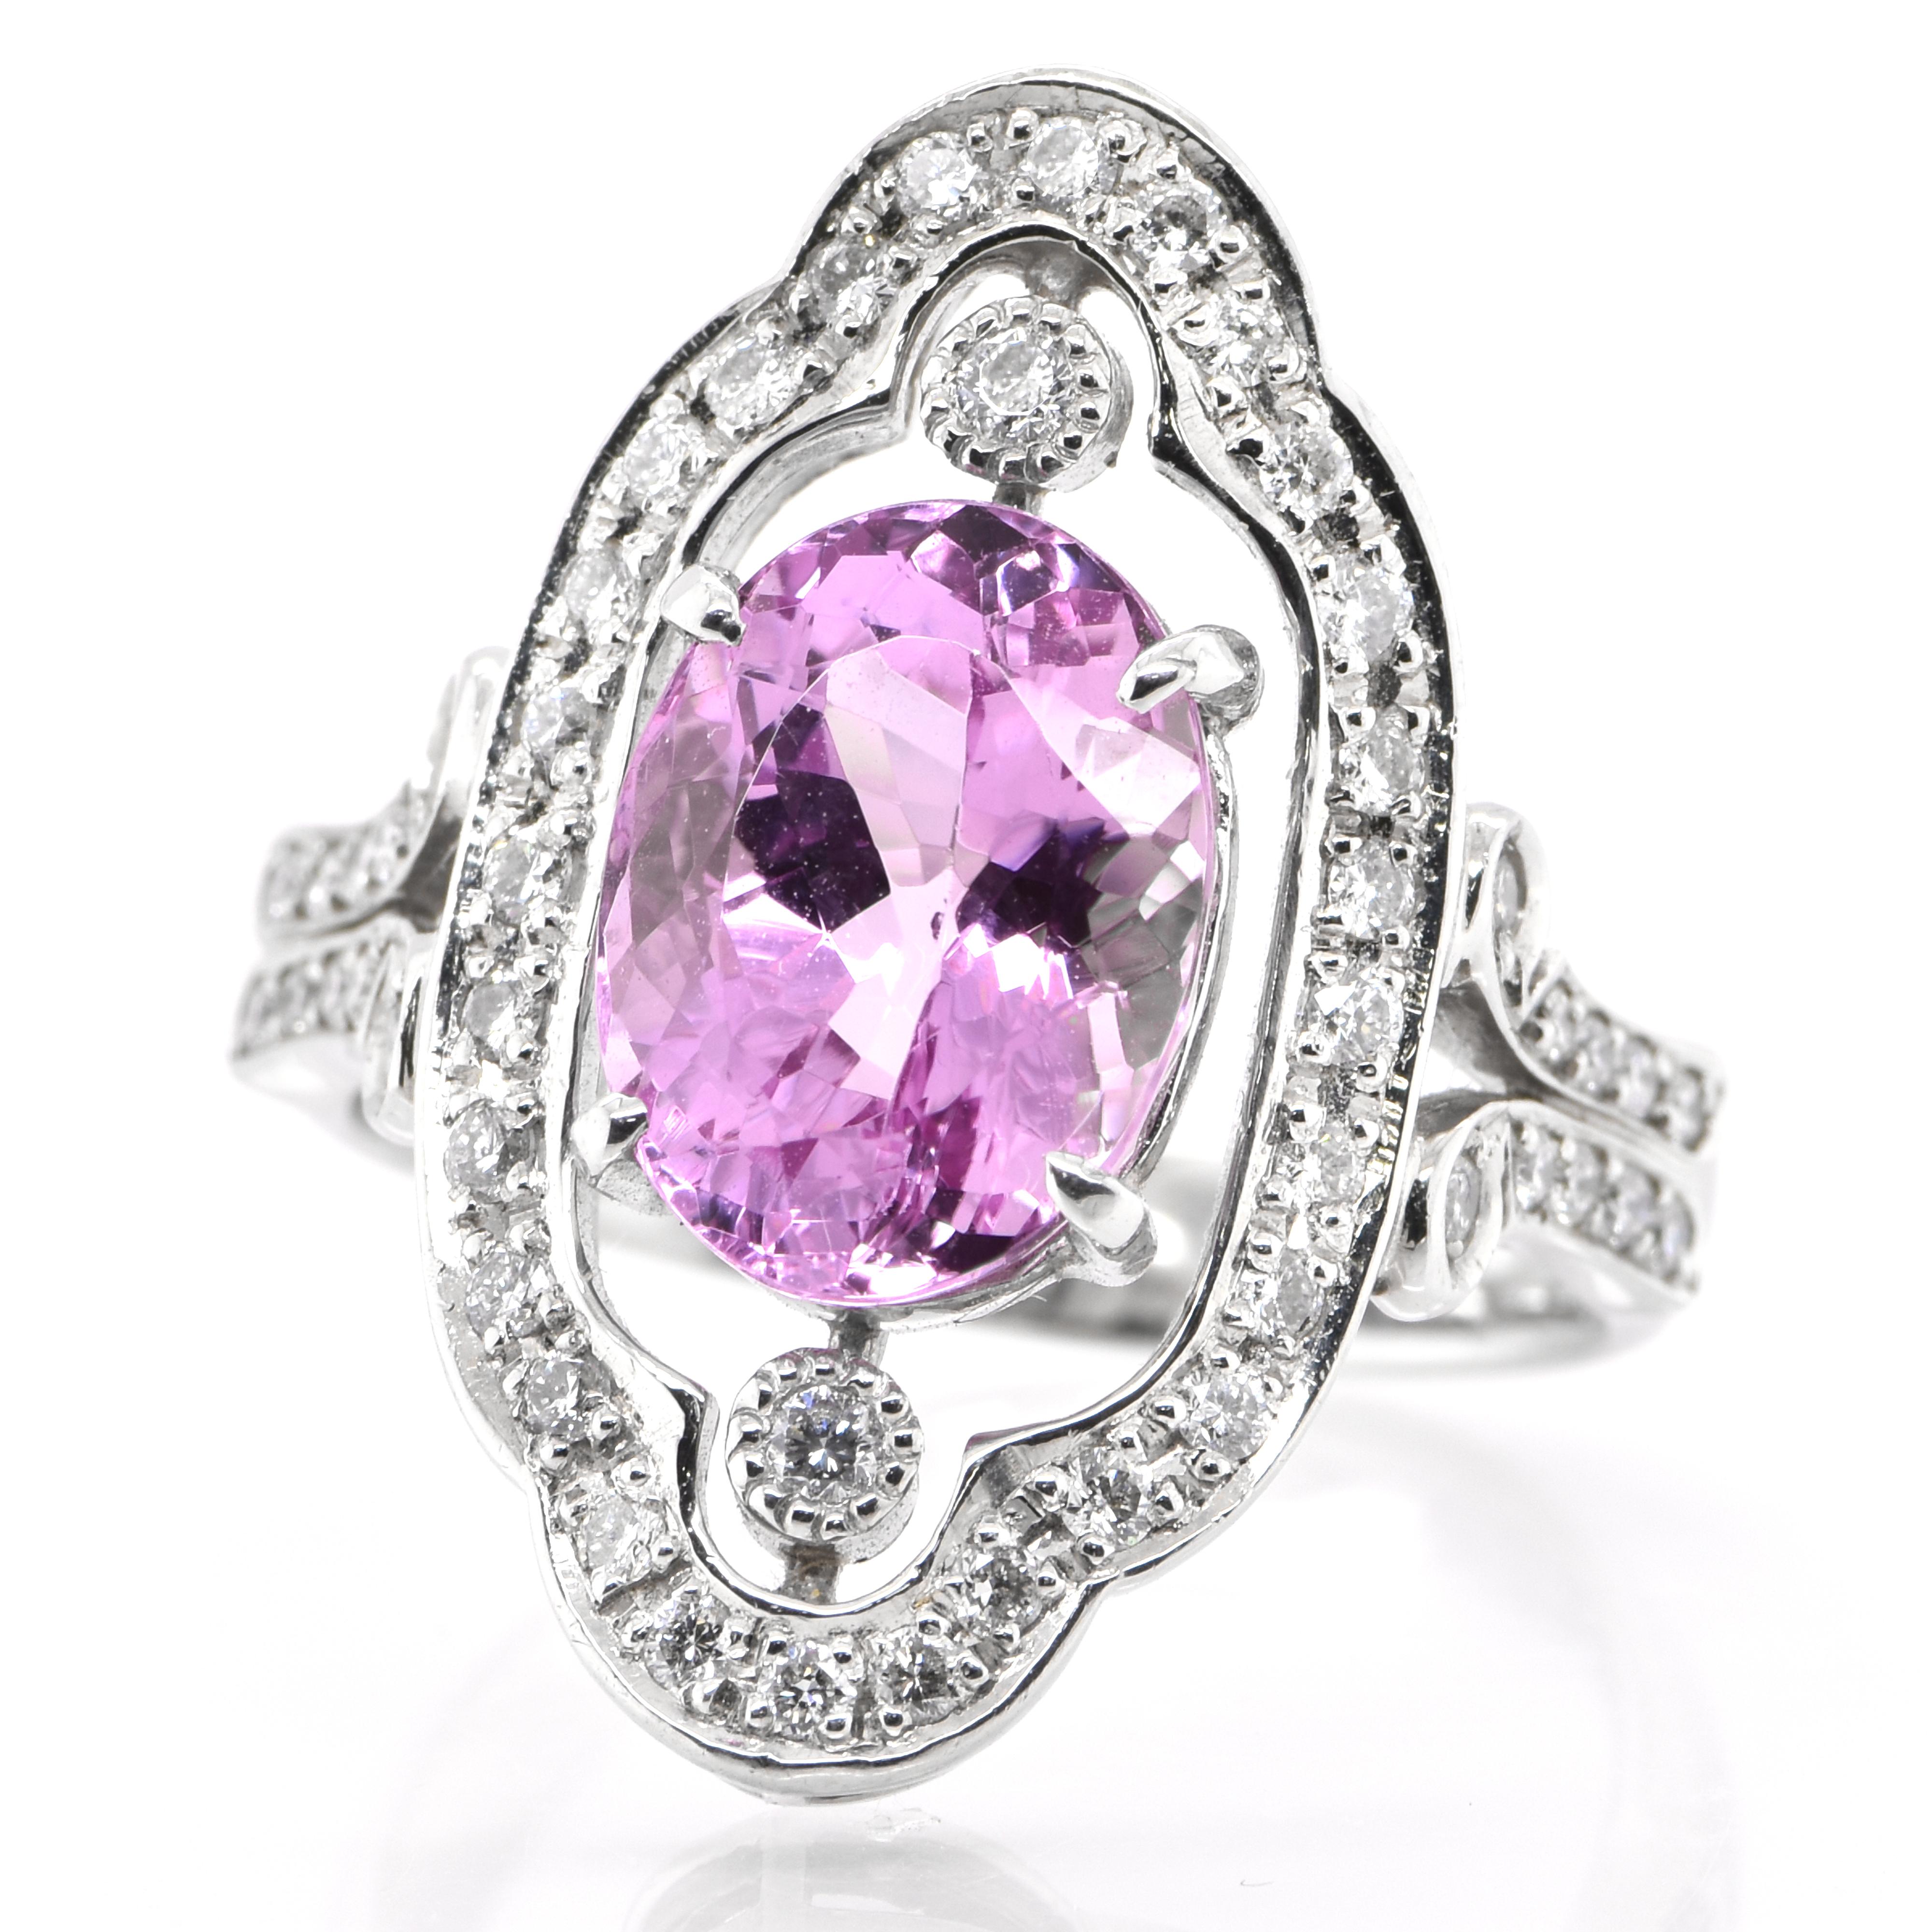 A beautiful Ring featuring a Natural 4.15 Carat Pink Topaz and 0.48 carats Diamond Accents set in Platinum. Today Ouro Preto in Brazil is the primary source of Topaz in the world. The ring is made in Japan. Ring size and stamping detailed below.